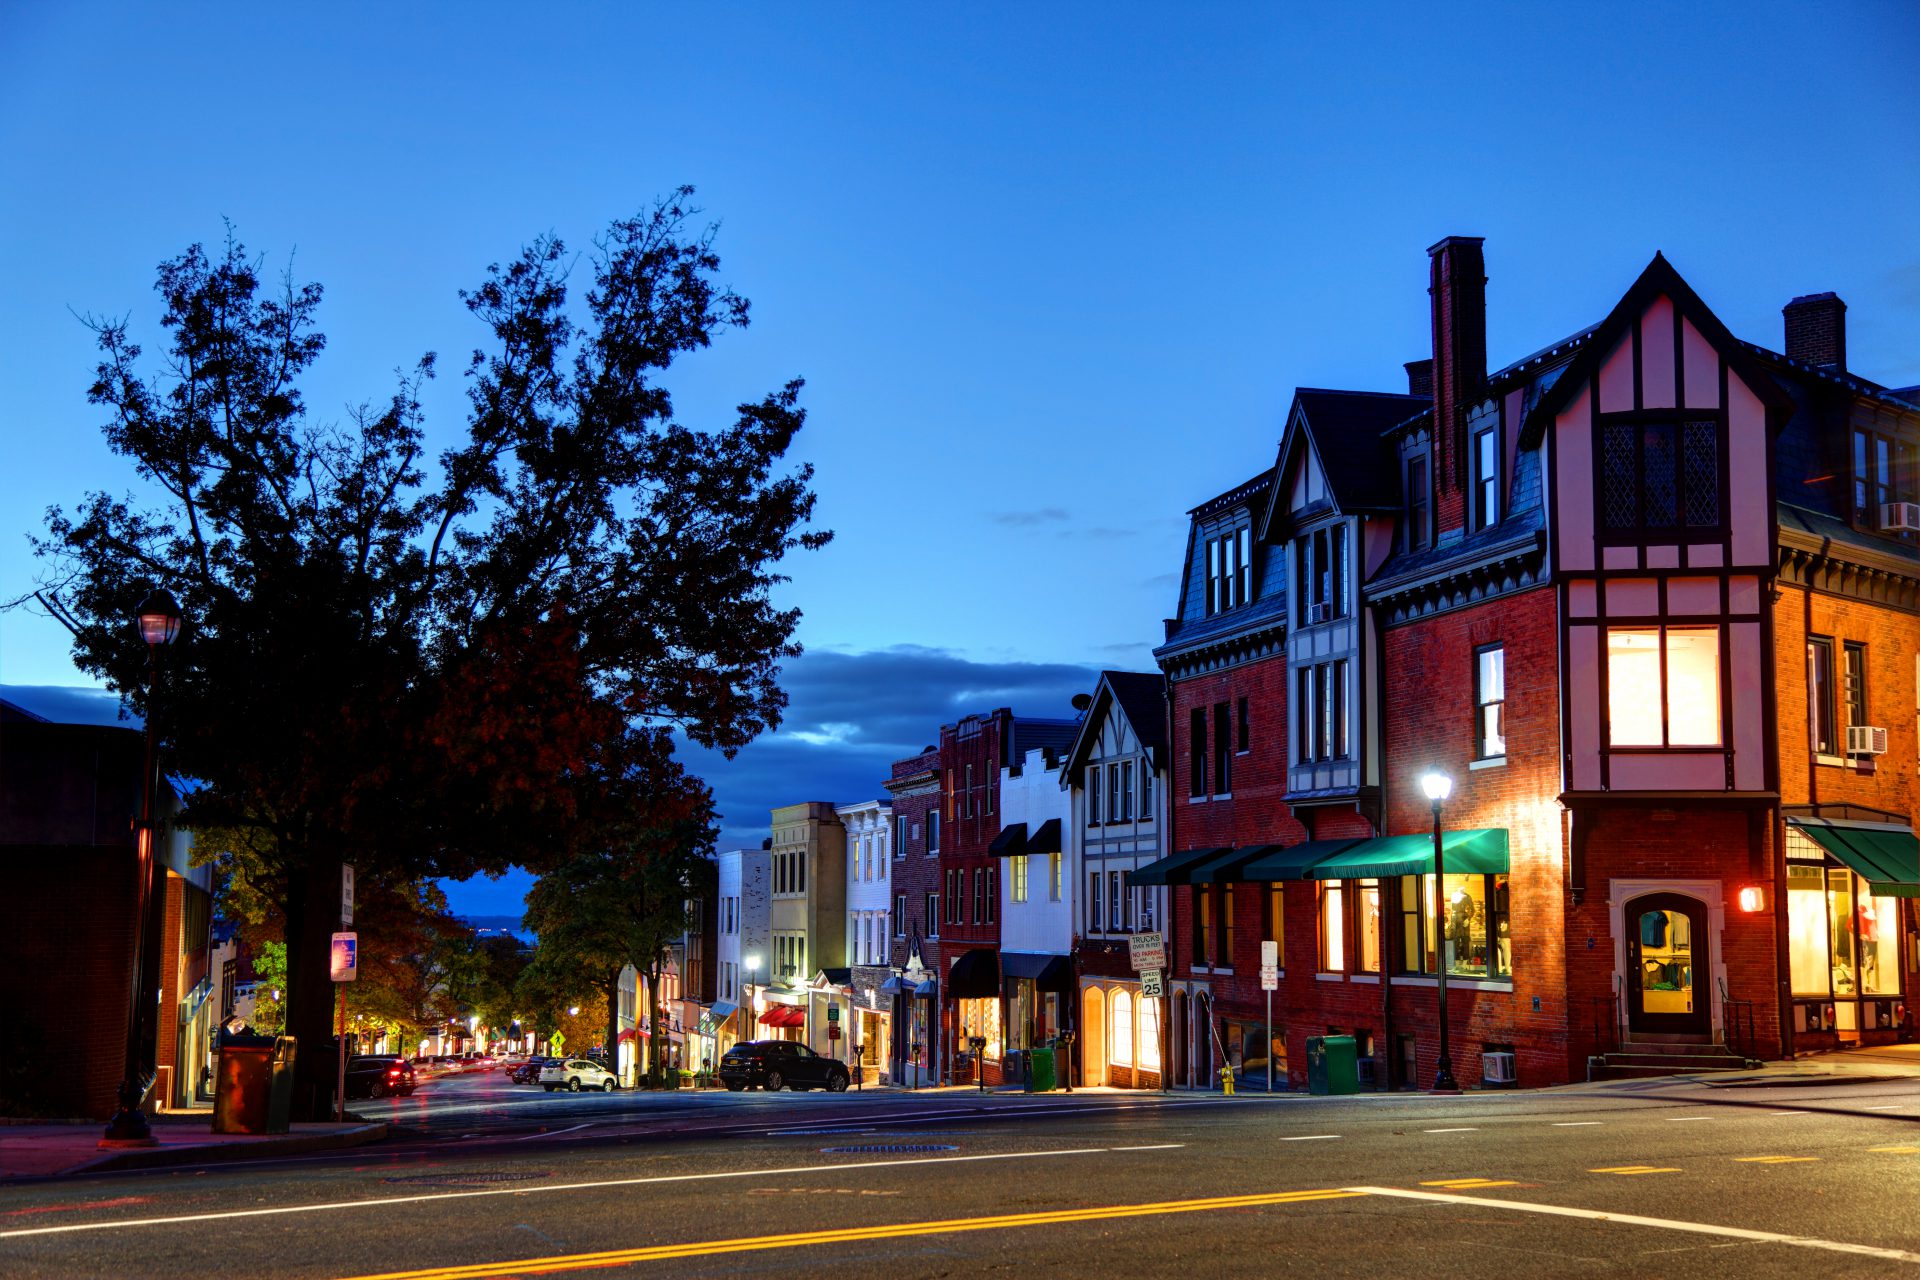 Downtown Greenwhich, Connecticut at dusk